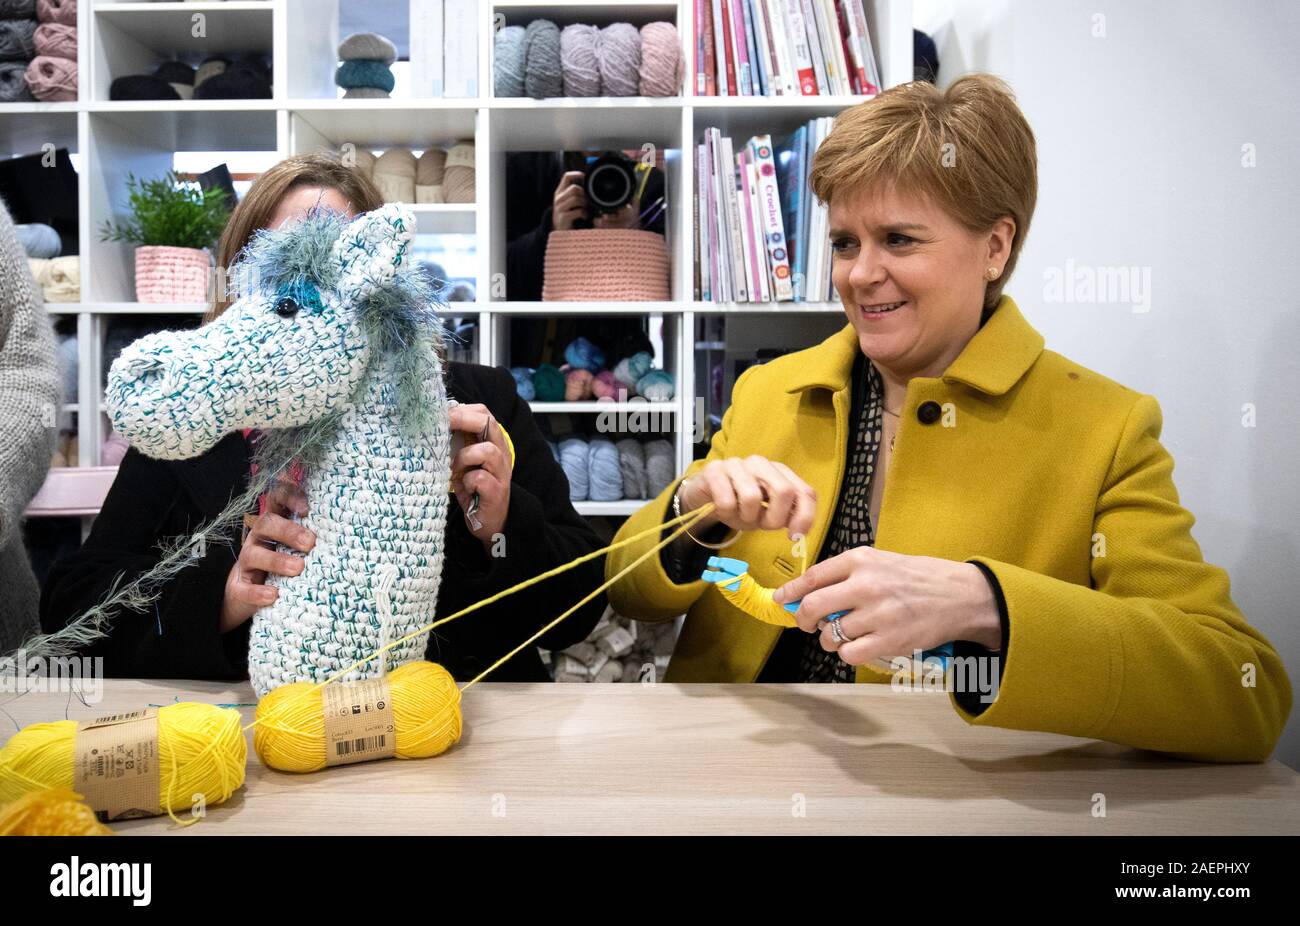 SNP leader Nicola Sturgeon (right) makes pom-poms with SNP candidate Kirsten Oswald, as they take part in a knitting workshop during a visit to the Orry Mill, Glasgow, while on the General Election campaign trail. Stock Photo